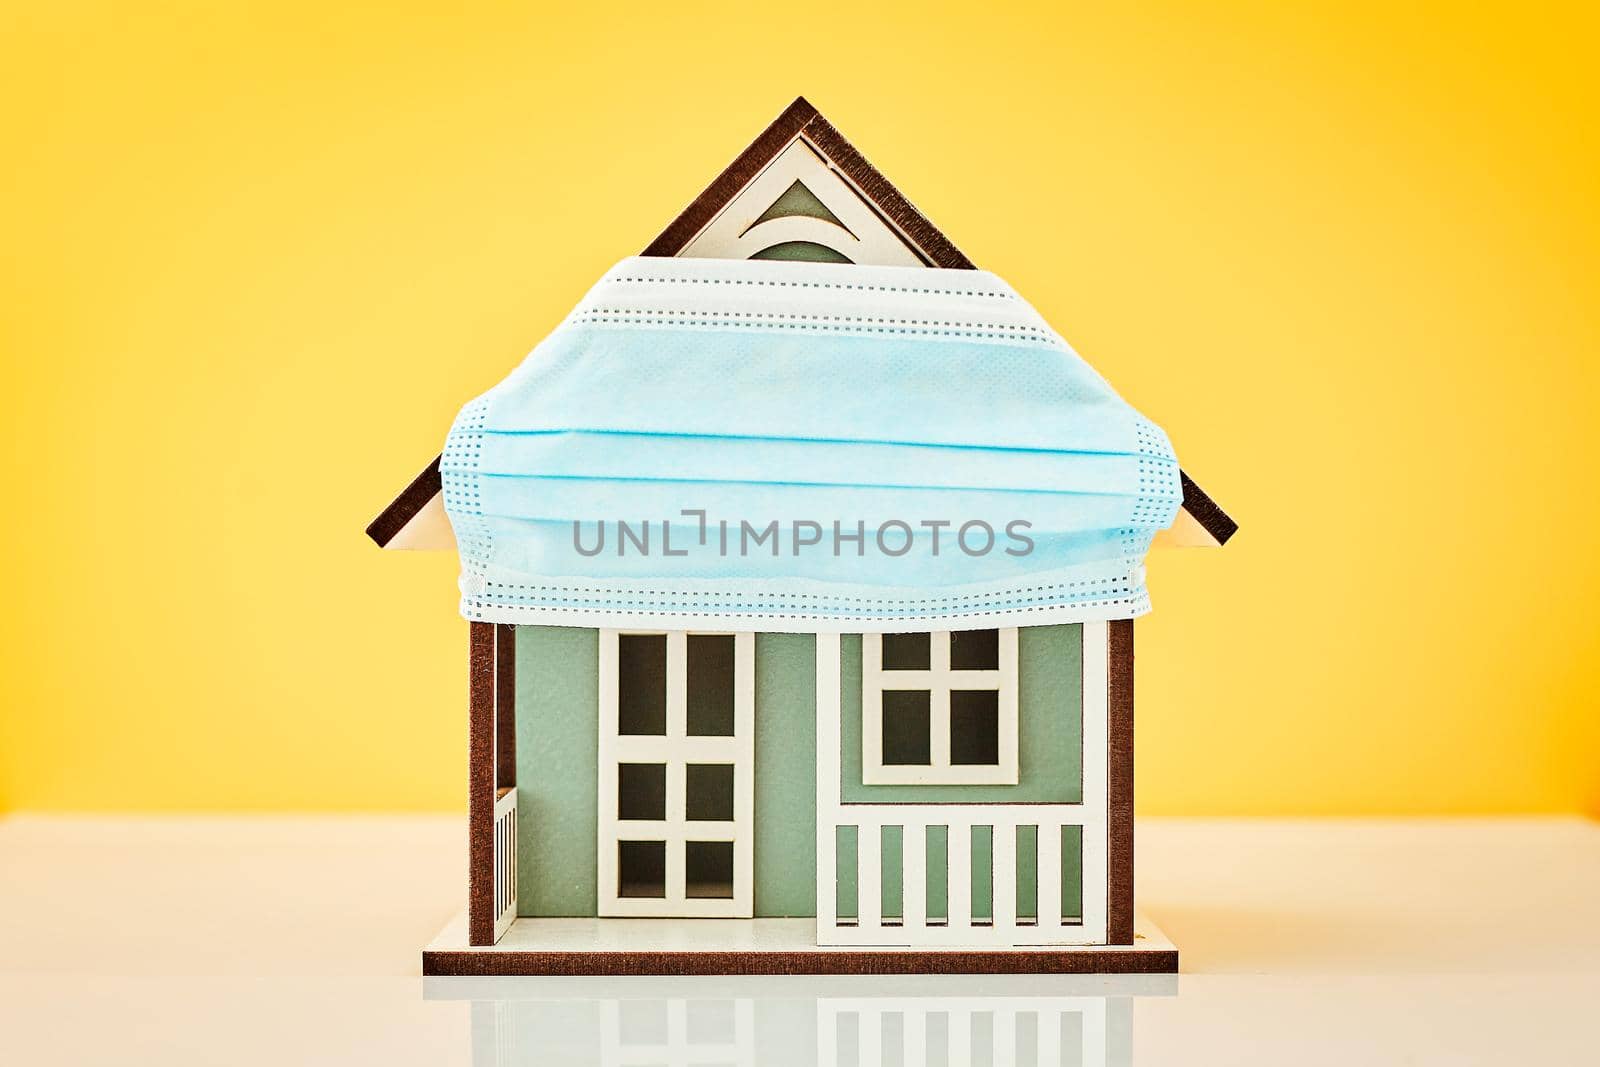 Model house wearing protective medical mask in yellow background